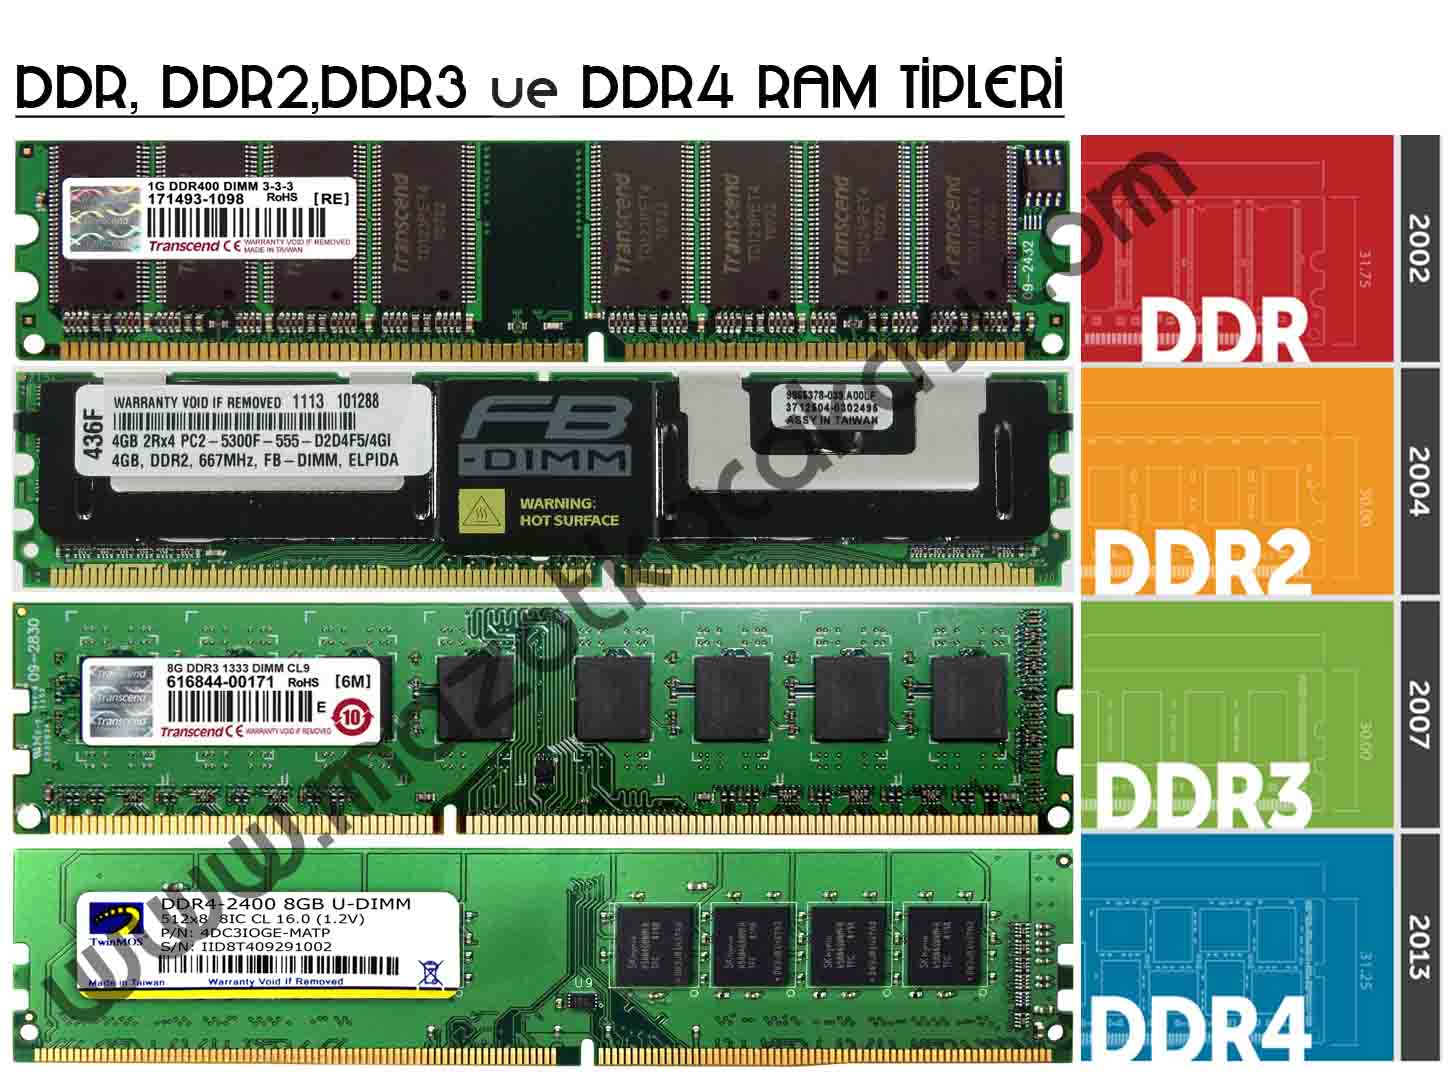 can i use ddr3 in a ddr4 slot